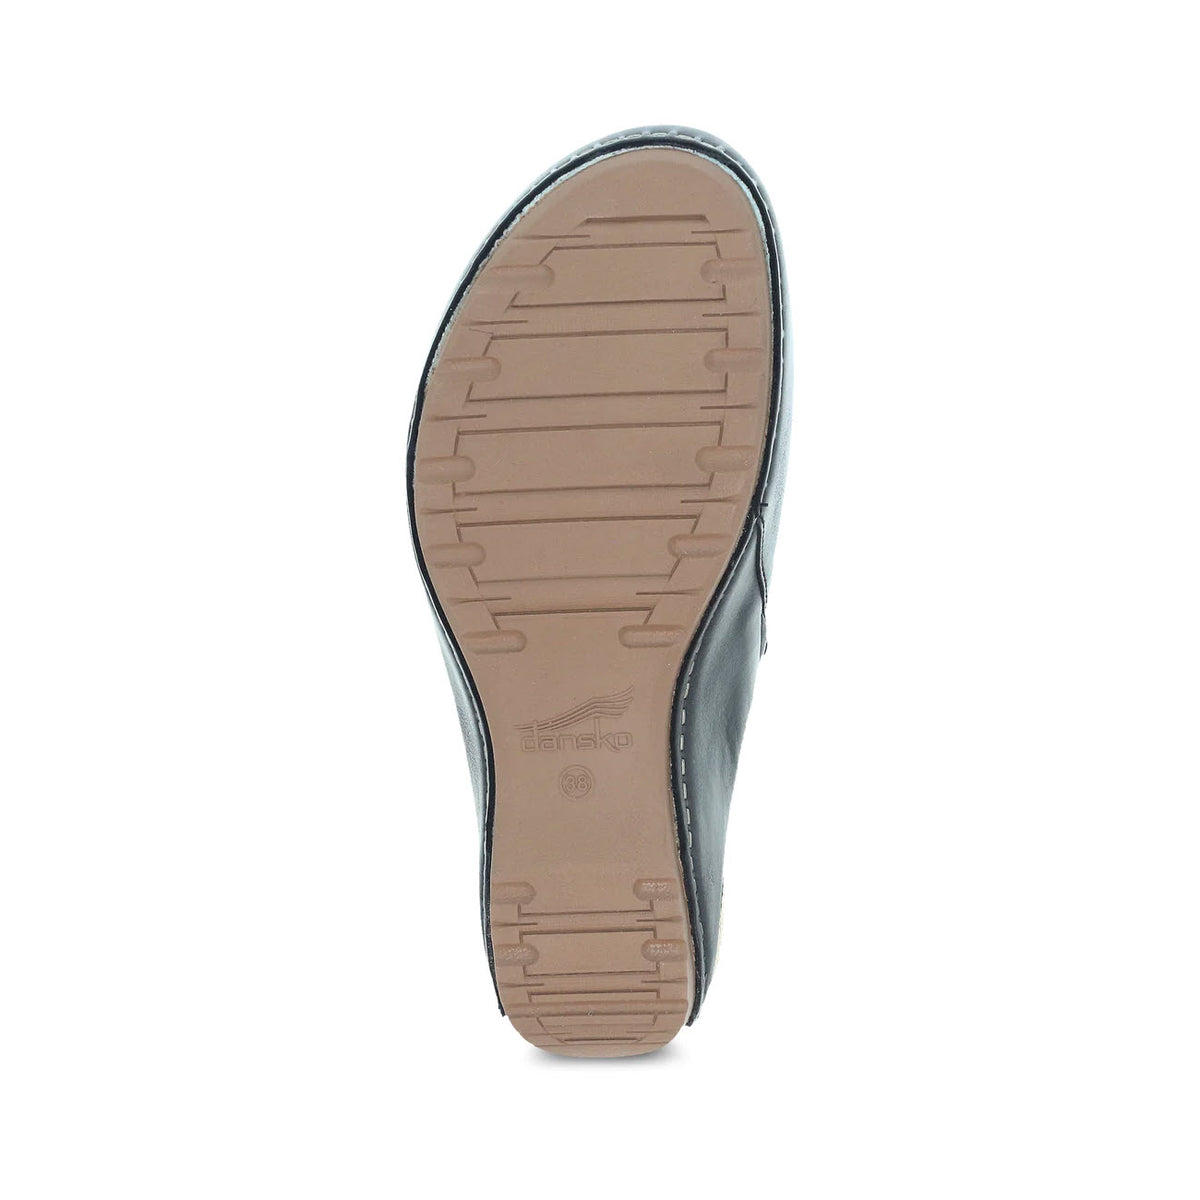 Bottom view of a gray DANSKO TALULAH shoe with milled nubuck uppers showing a flat sole with a textured design and the Dansko brand name embossed near the heel.